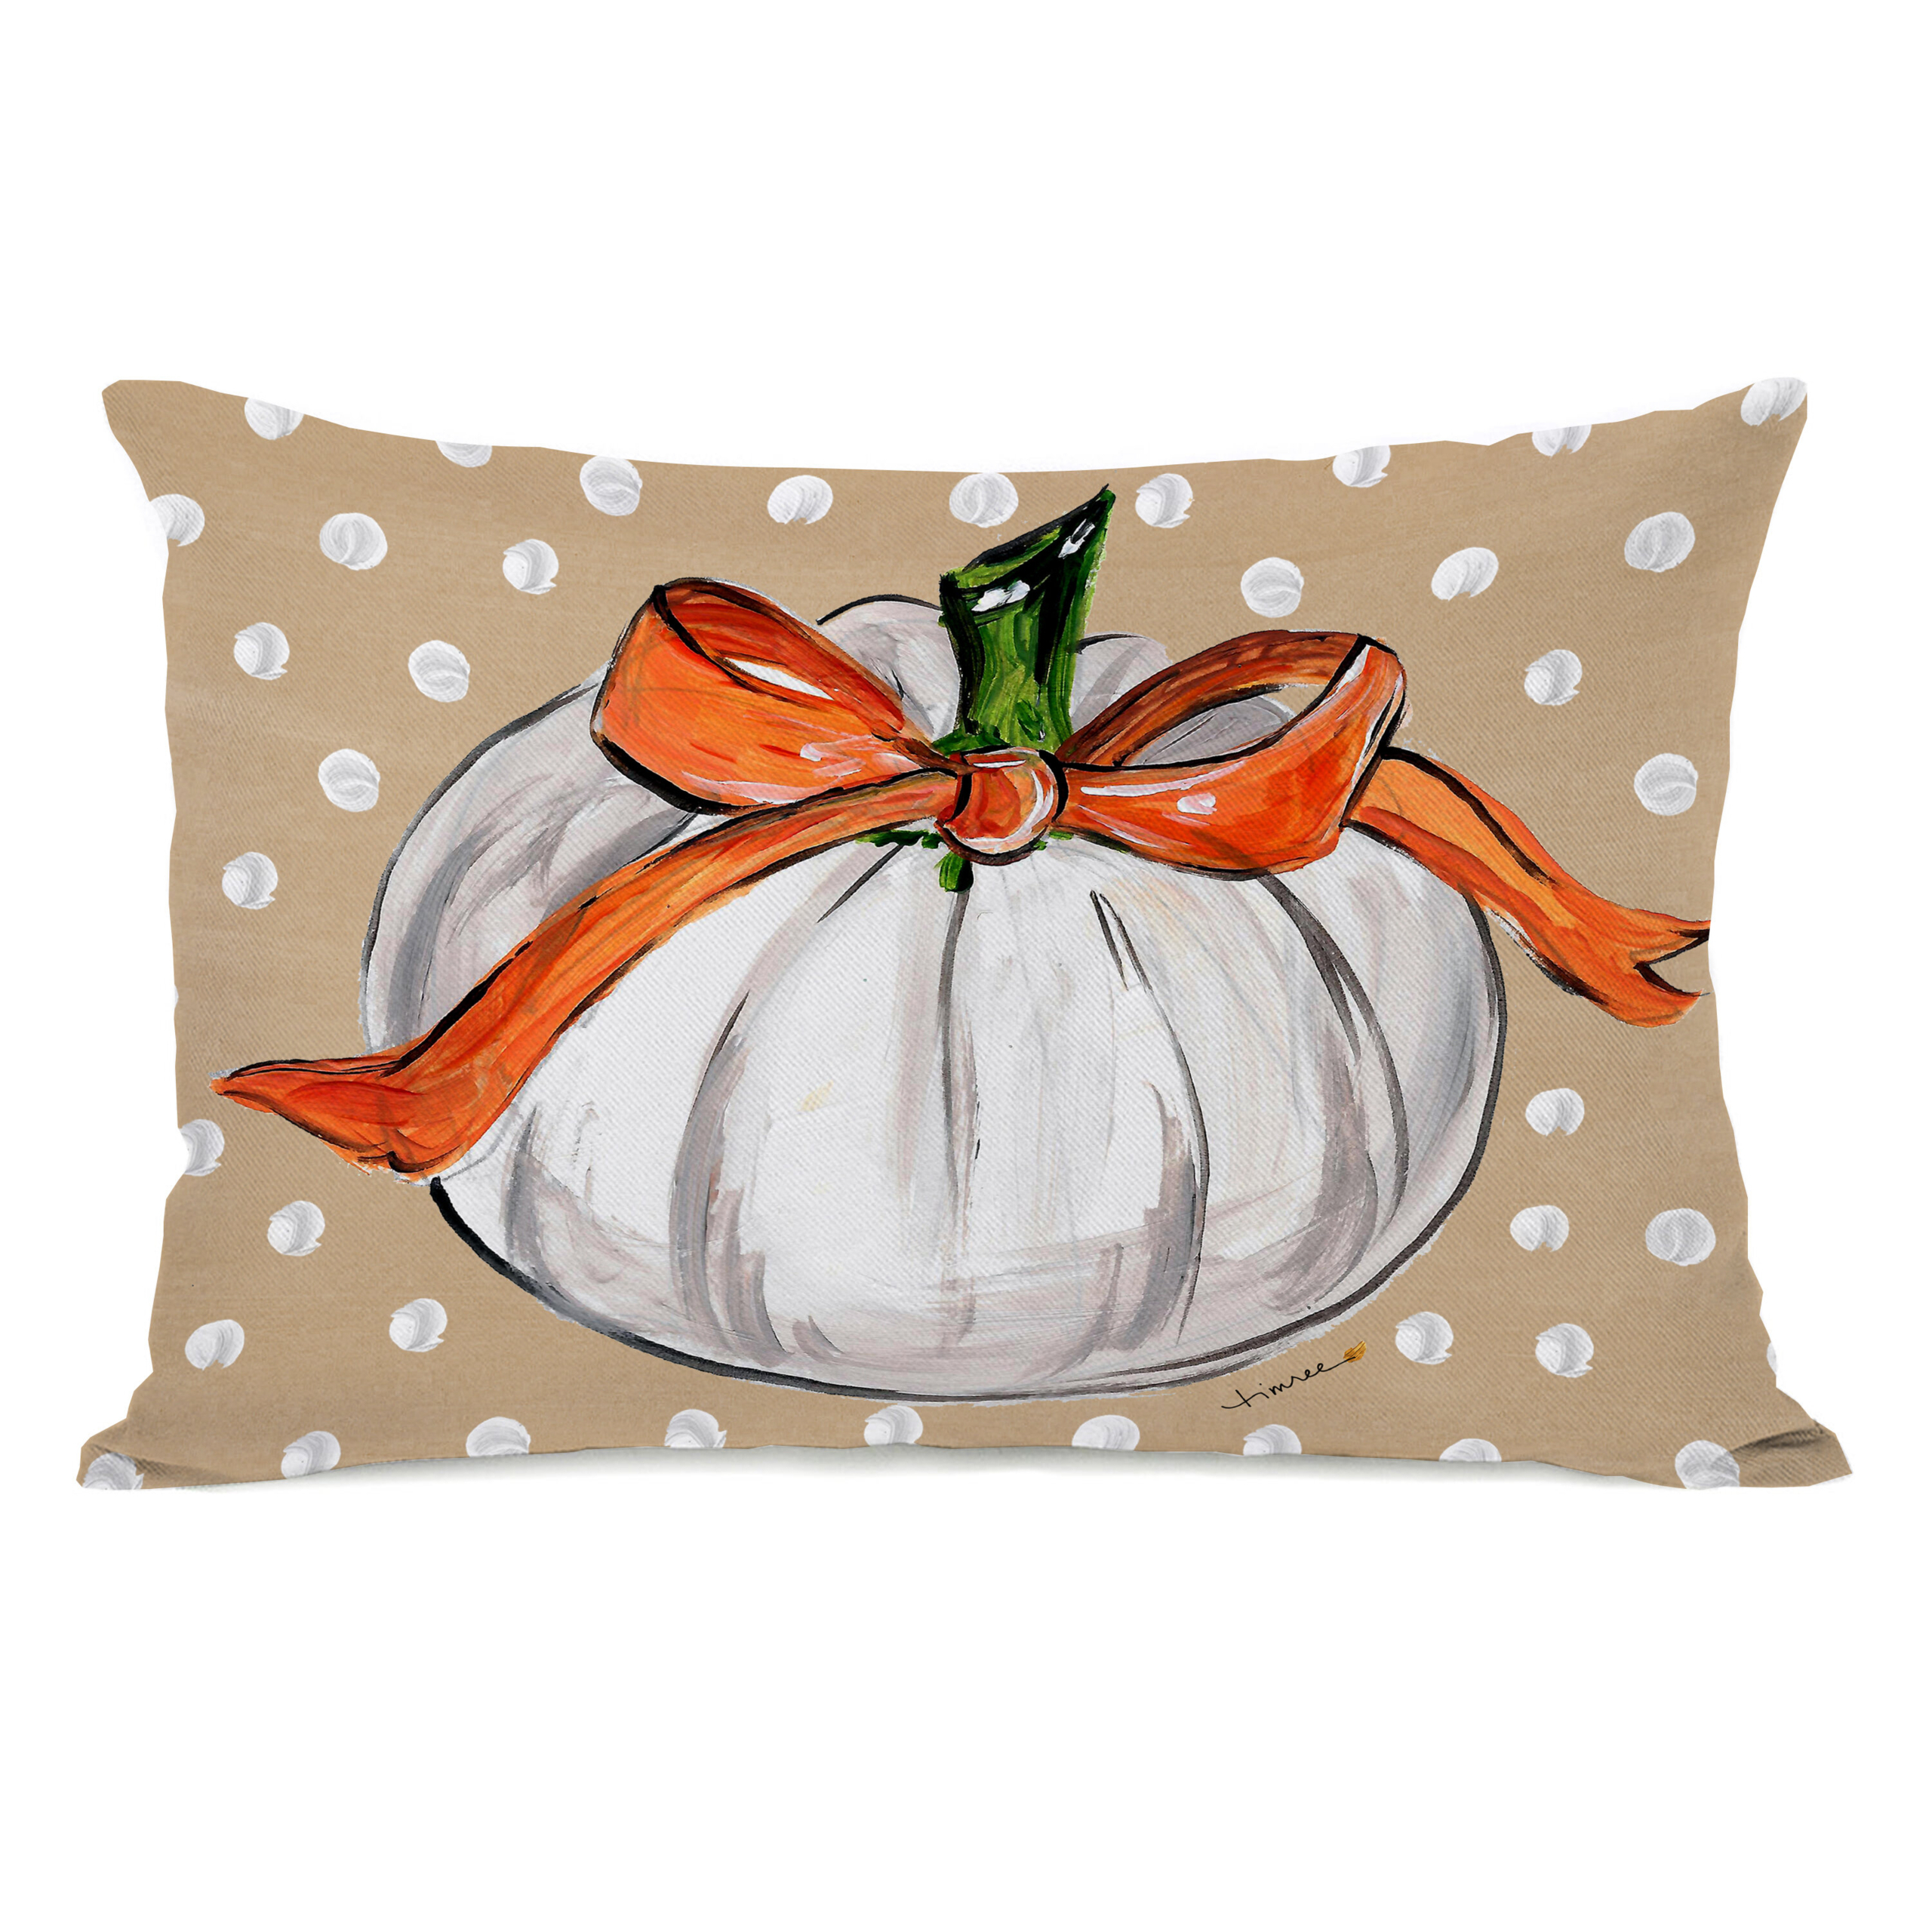 Halloween Pillow Covers 18X18 Vintage Jack O Lantern Pumpkin Print Tea Stained Throw Pillows Soft Sofa Couch Bed Car Cushion Pillow Cases Thanksgiving Harvest Home Decorations 